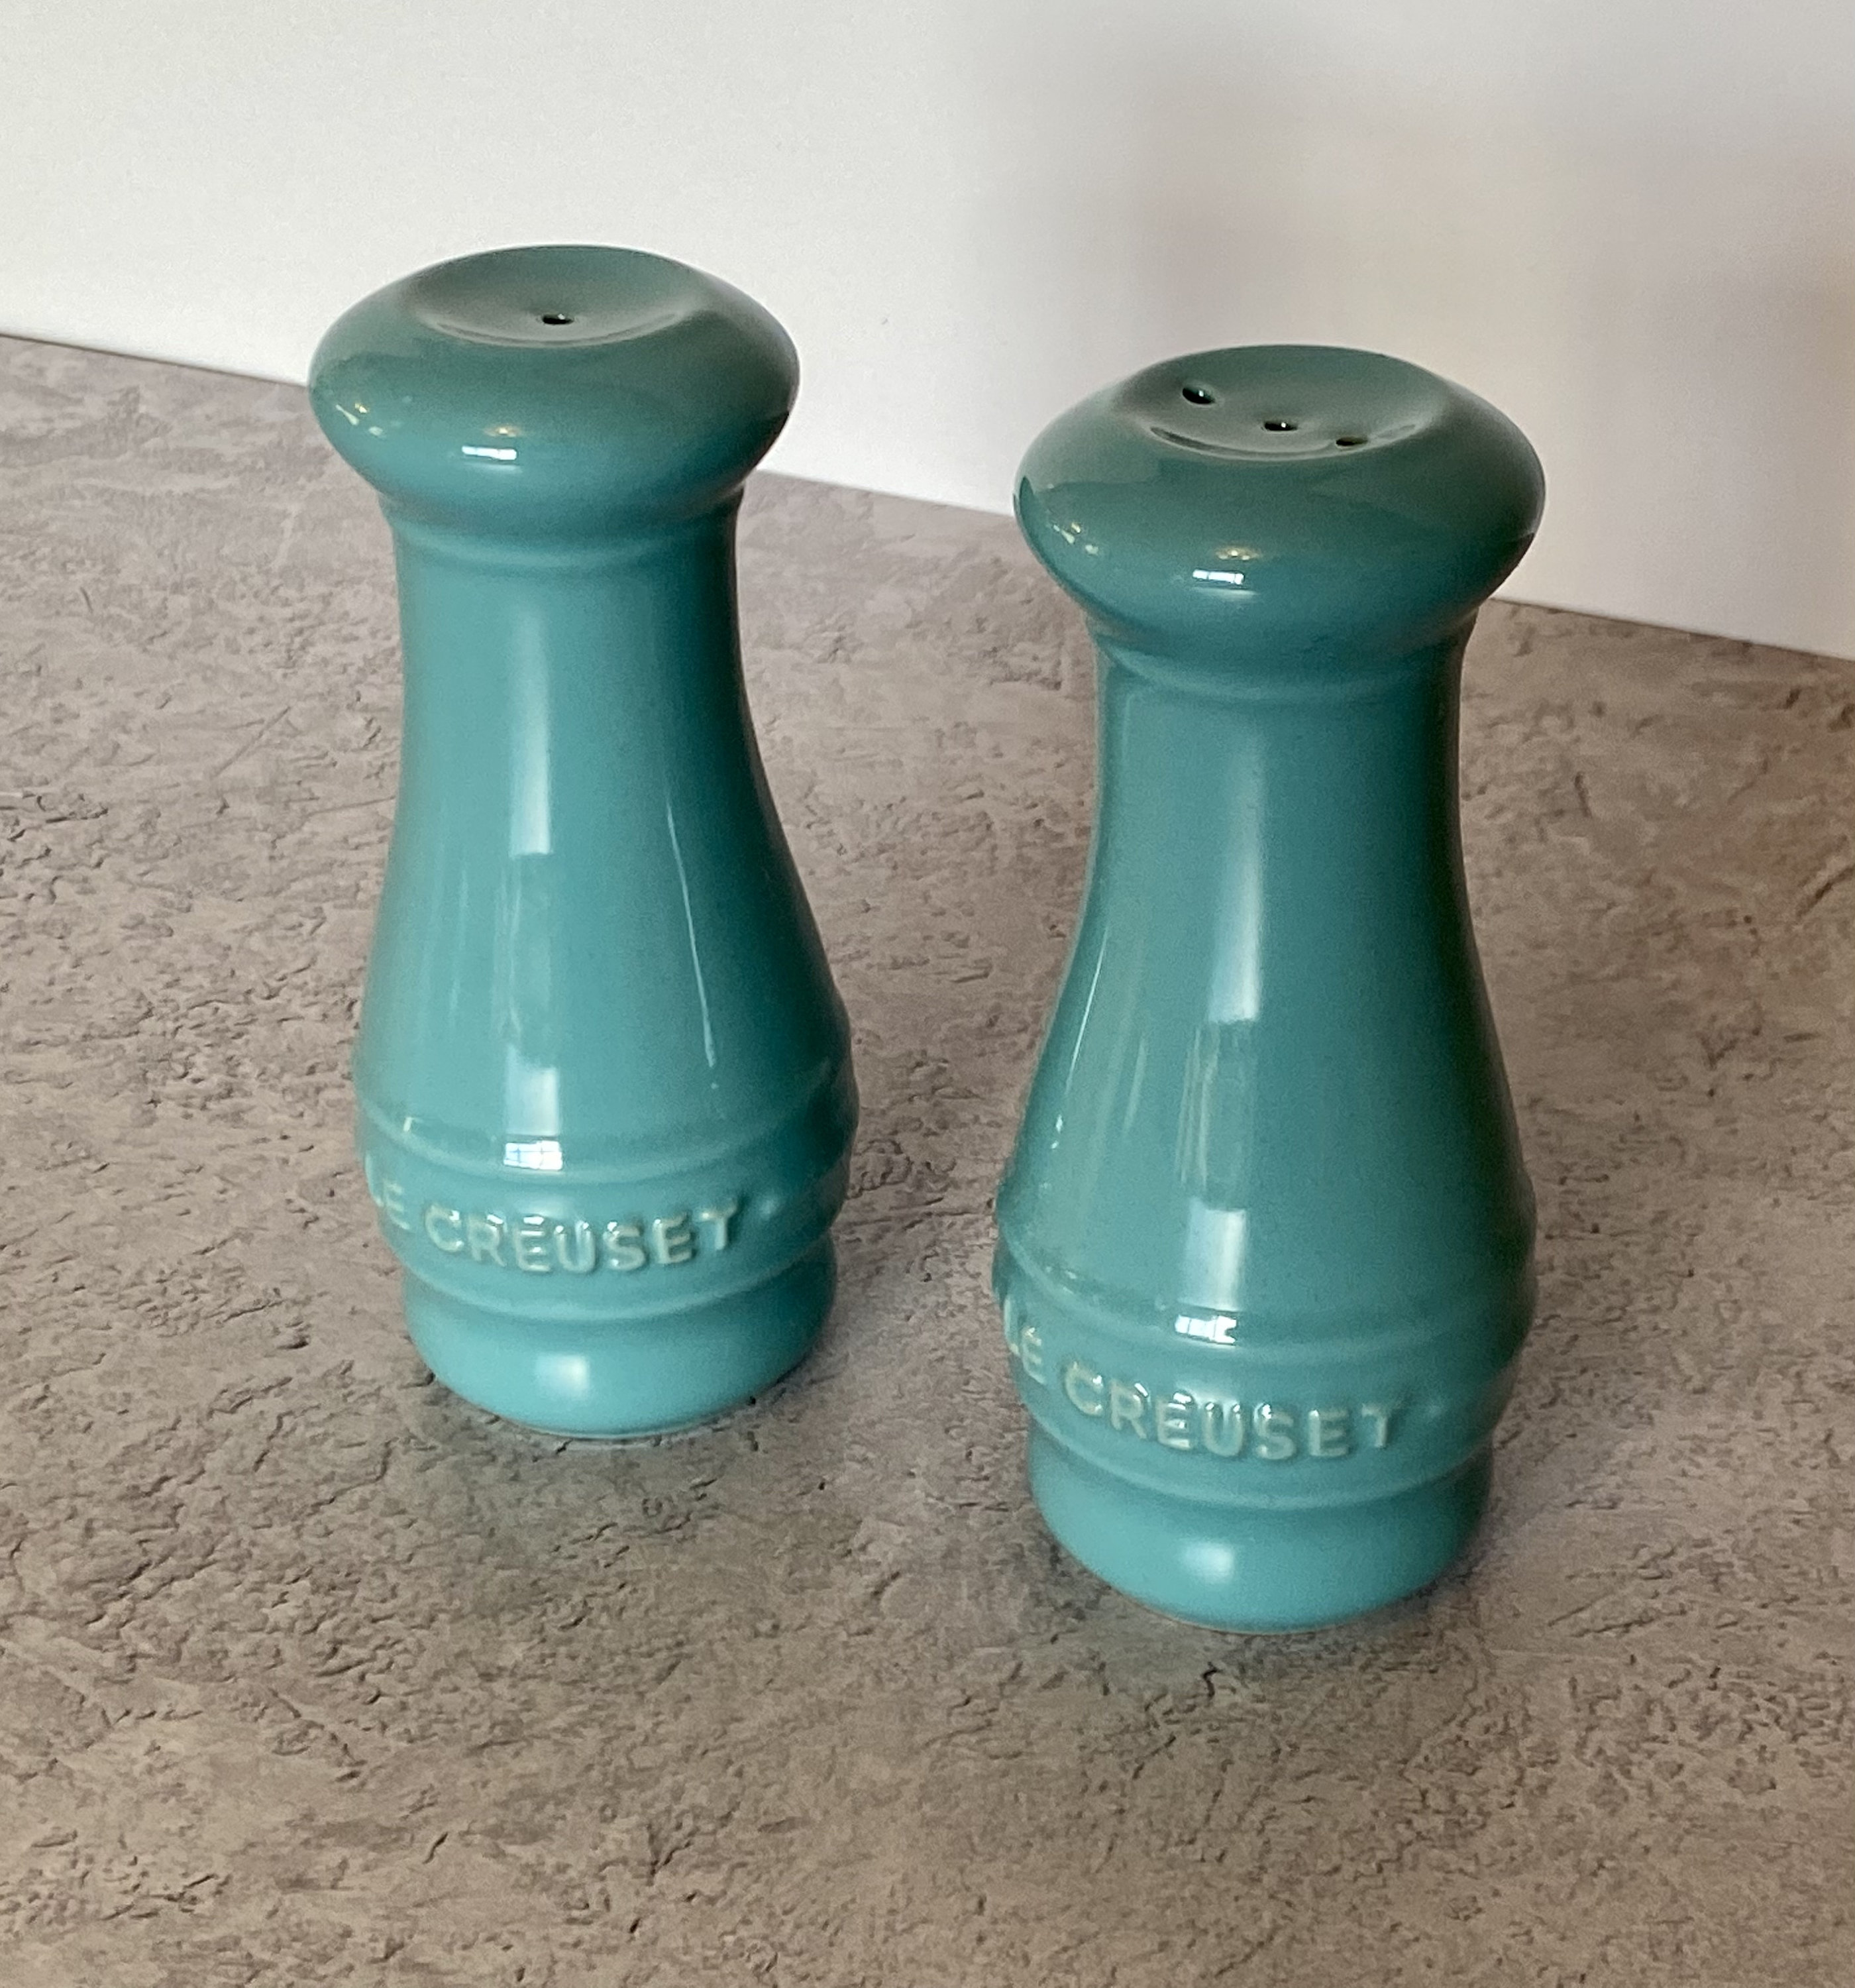 Le Creuset Turquoise Salt and Pepper Shakers 